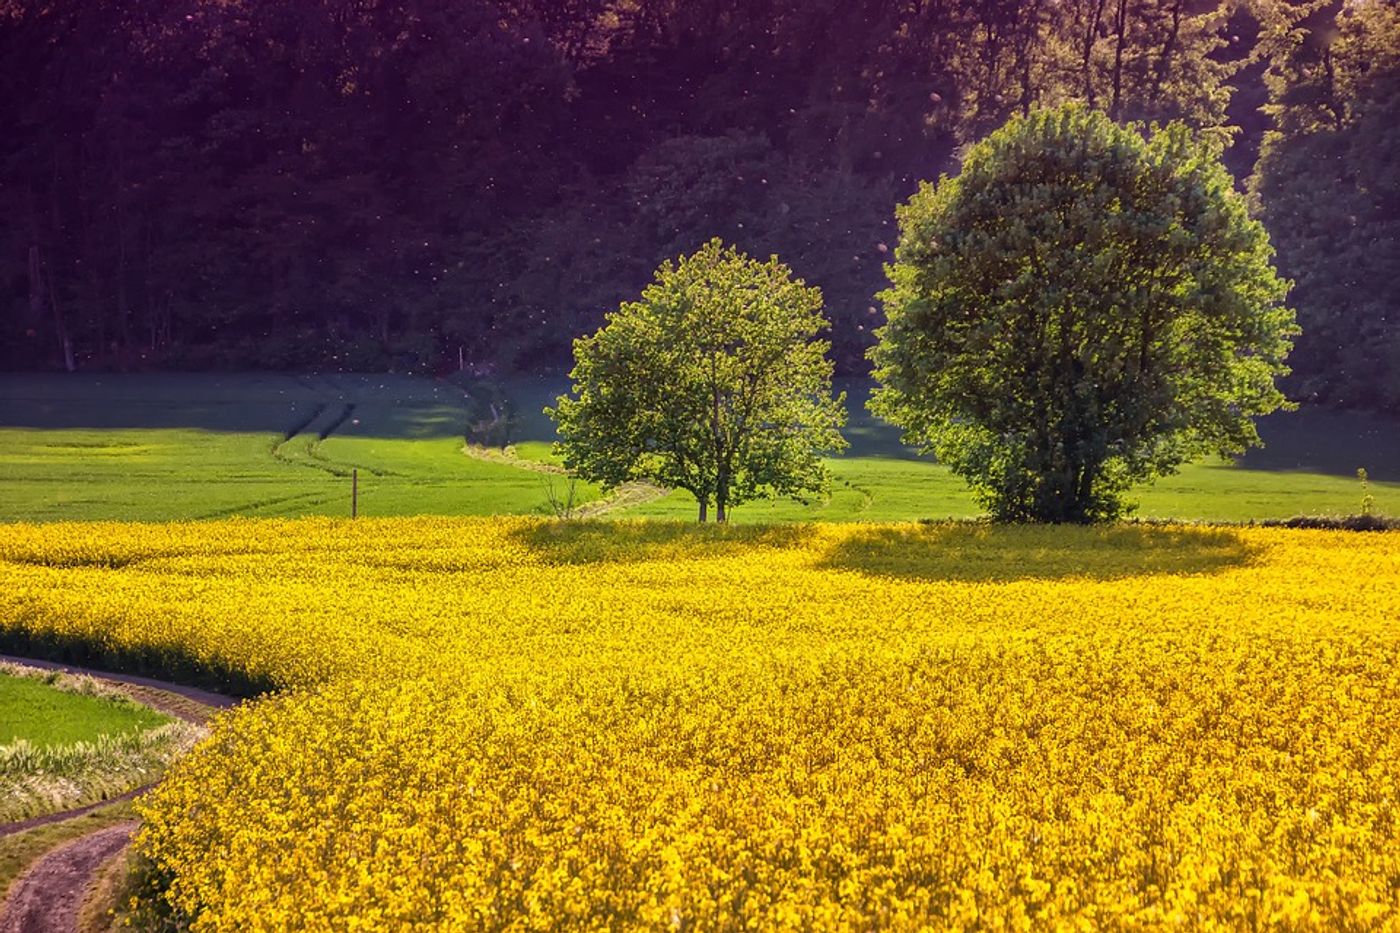 Oilseed rape is a common crop in the UK. Photo: Pixabay